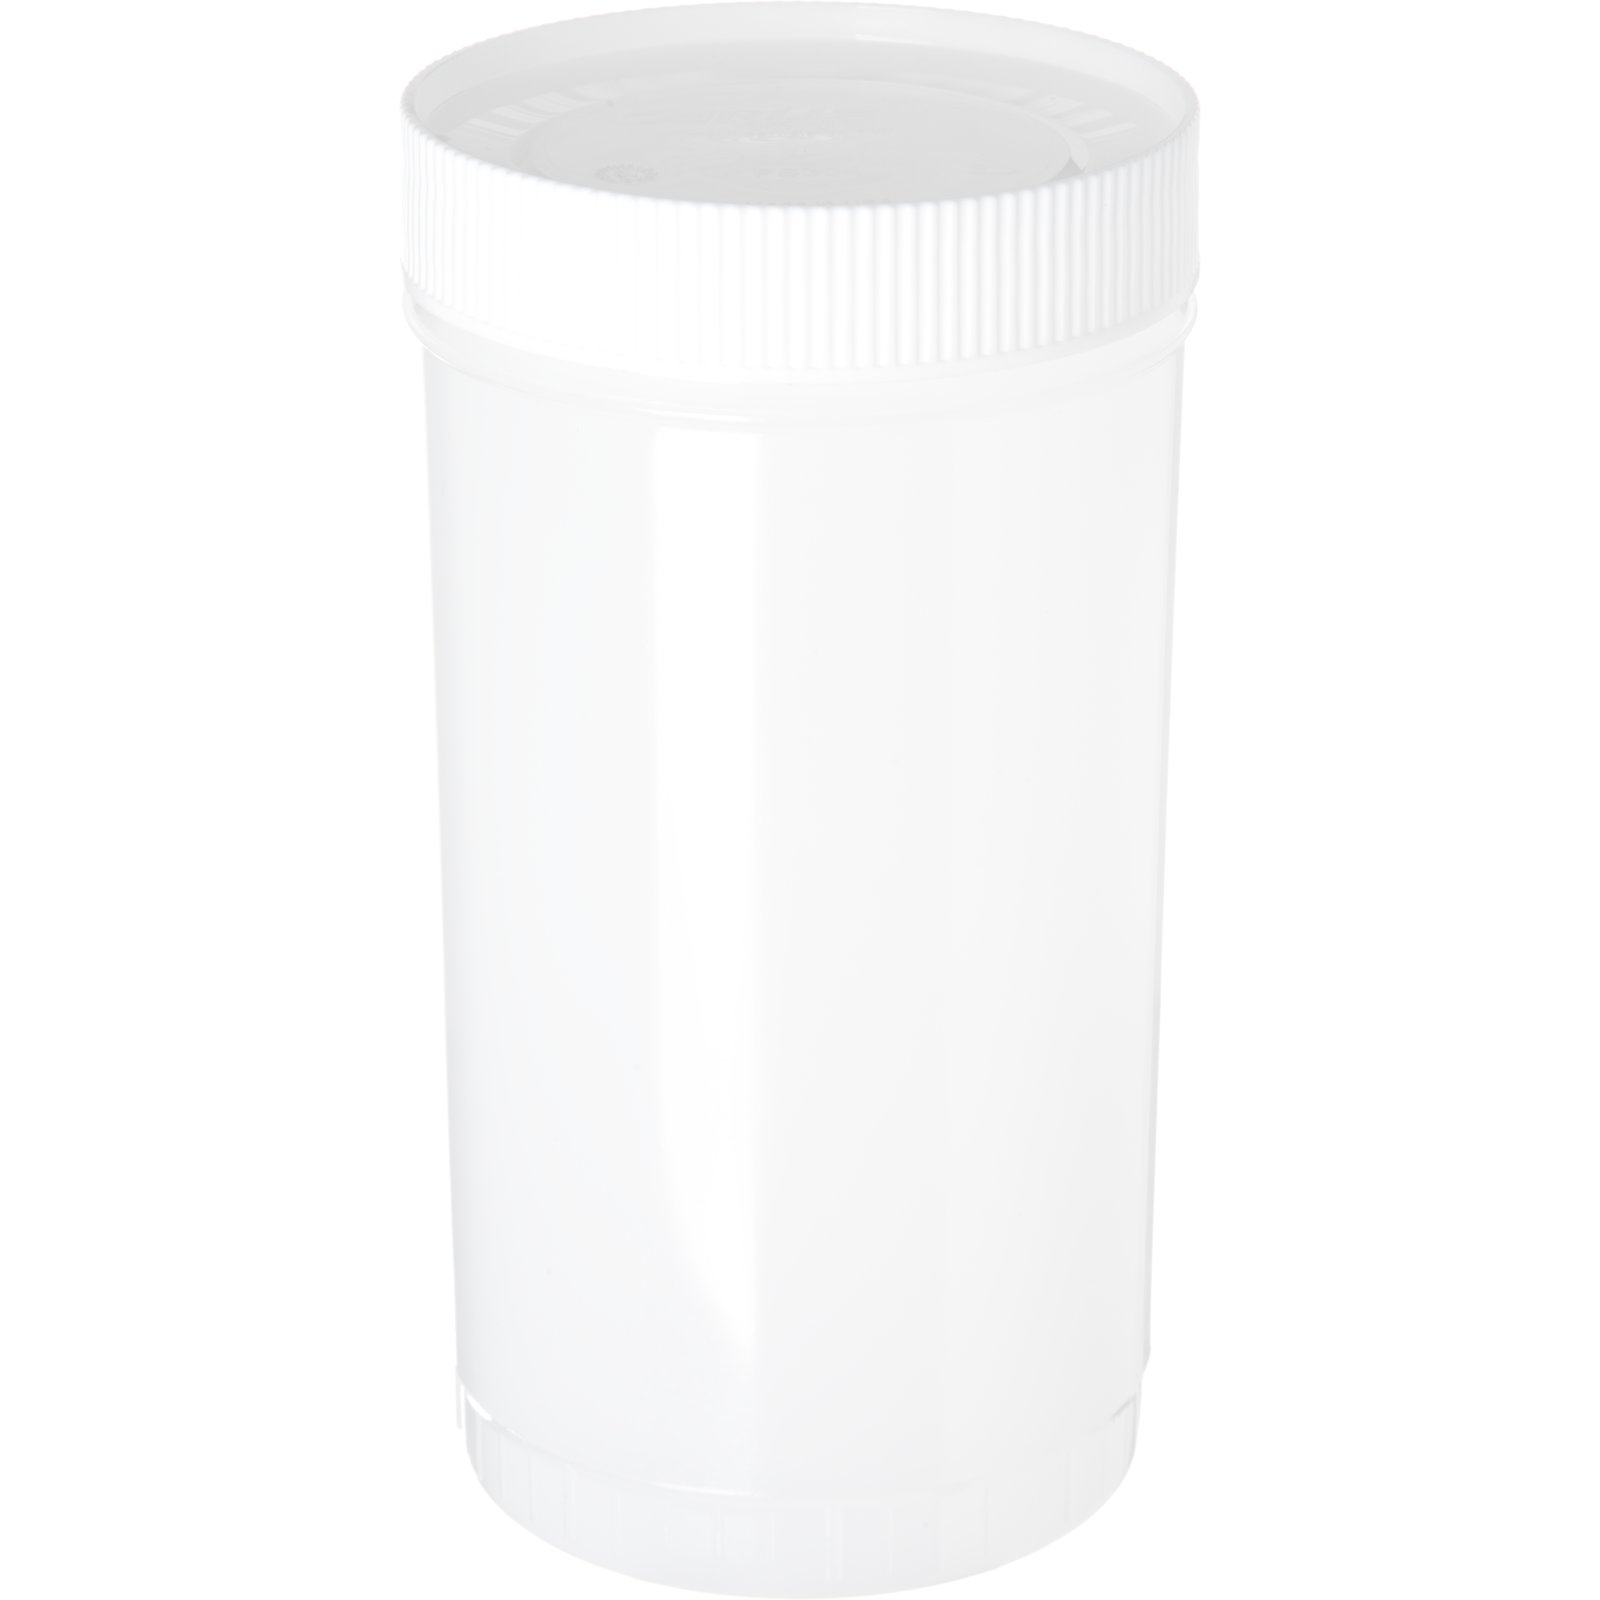 PS602N00 - Store N' Pour® Quart Backup Container w/ Assorted Color